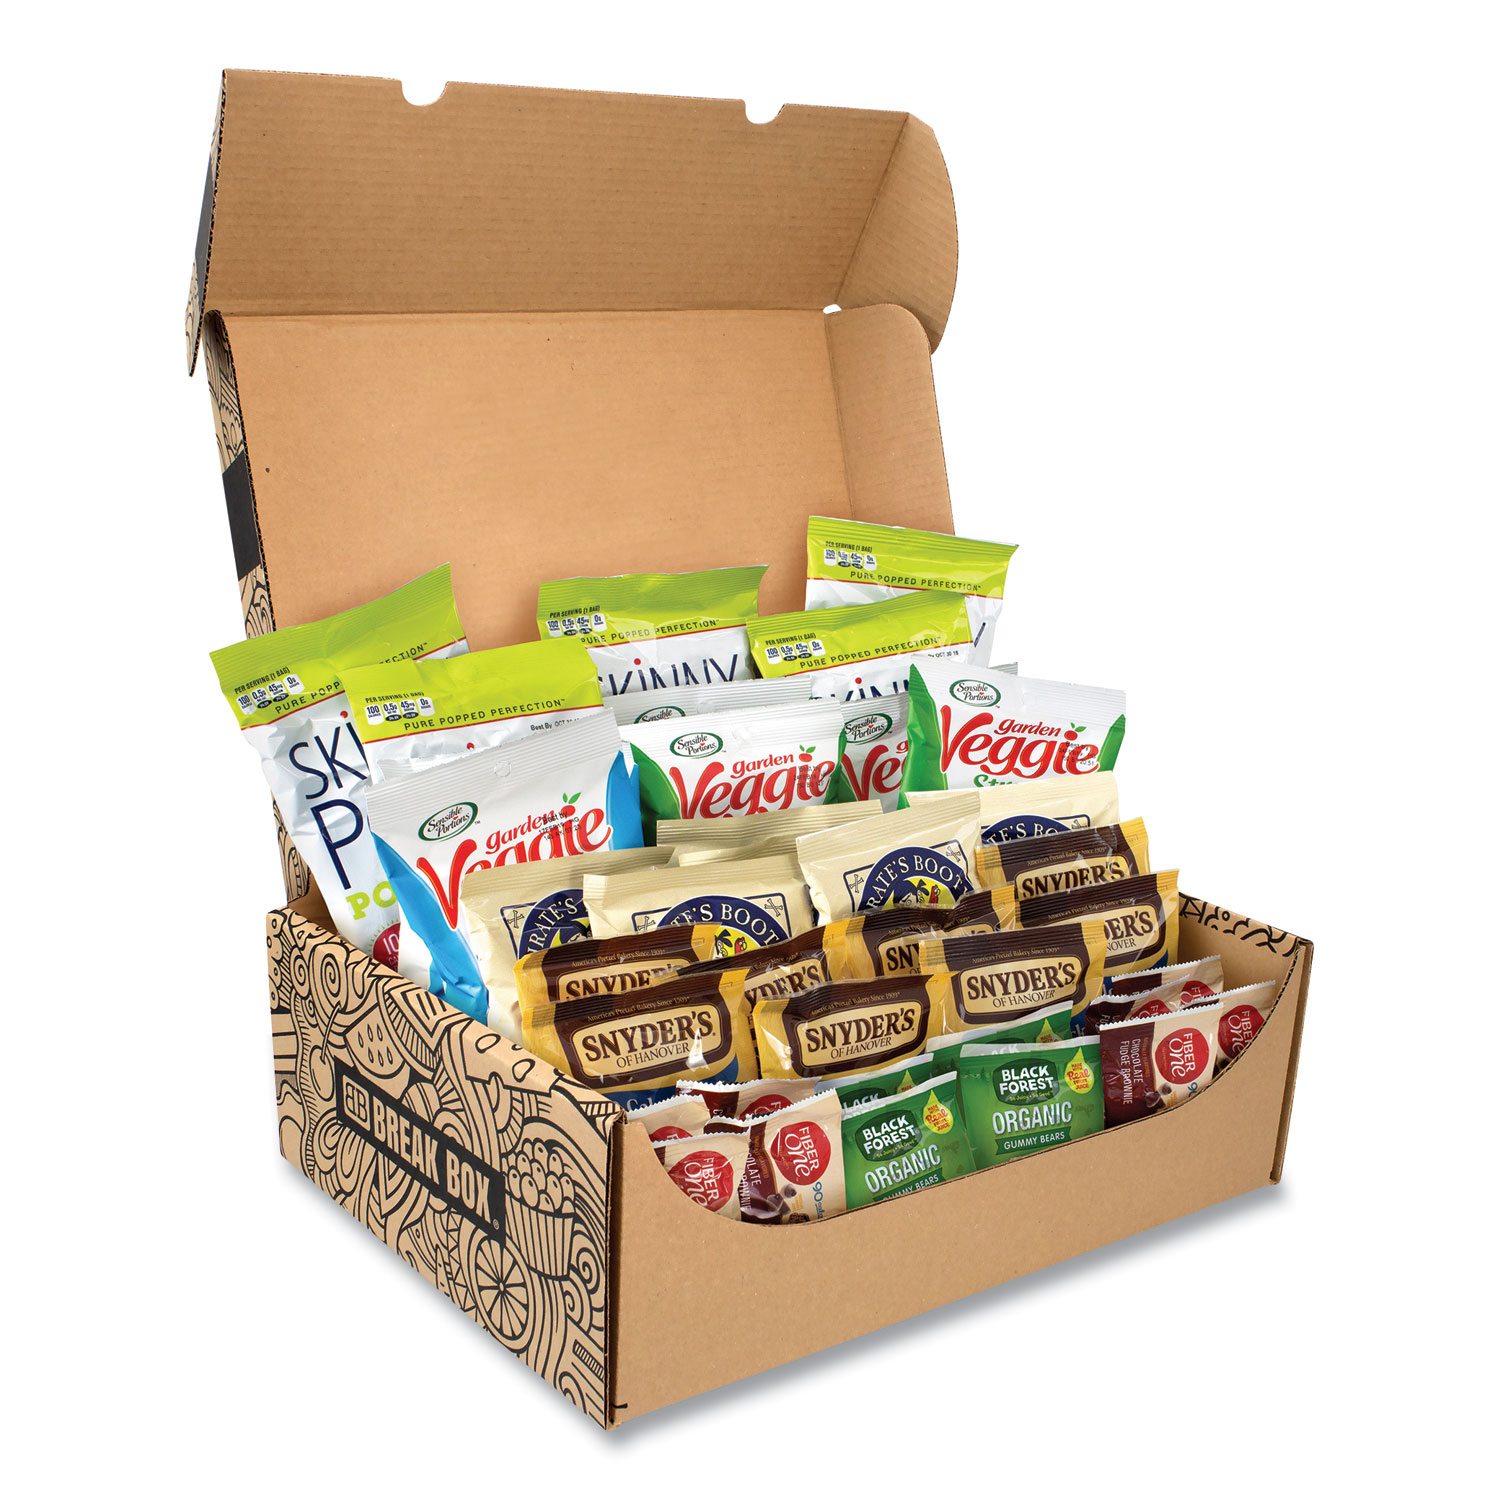  Snack Box Pros 70000005 Healthy Snack Box, 37 Assorted Snacks, Free Delivery in 1-4 Business Days (GRR700S0005) 